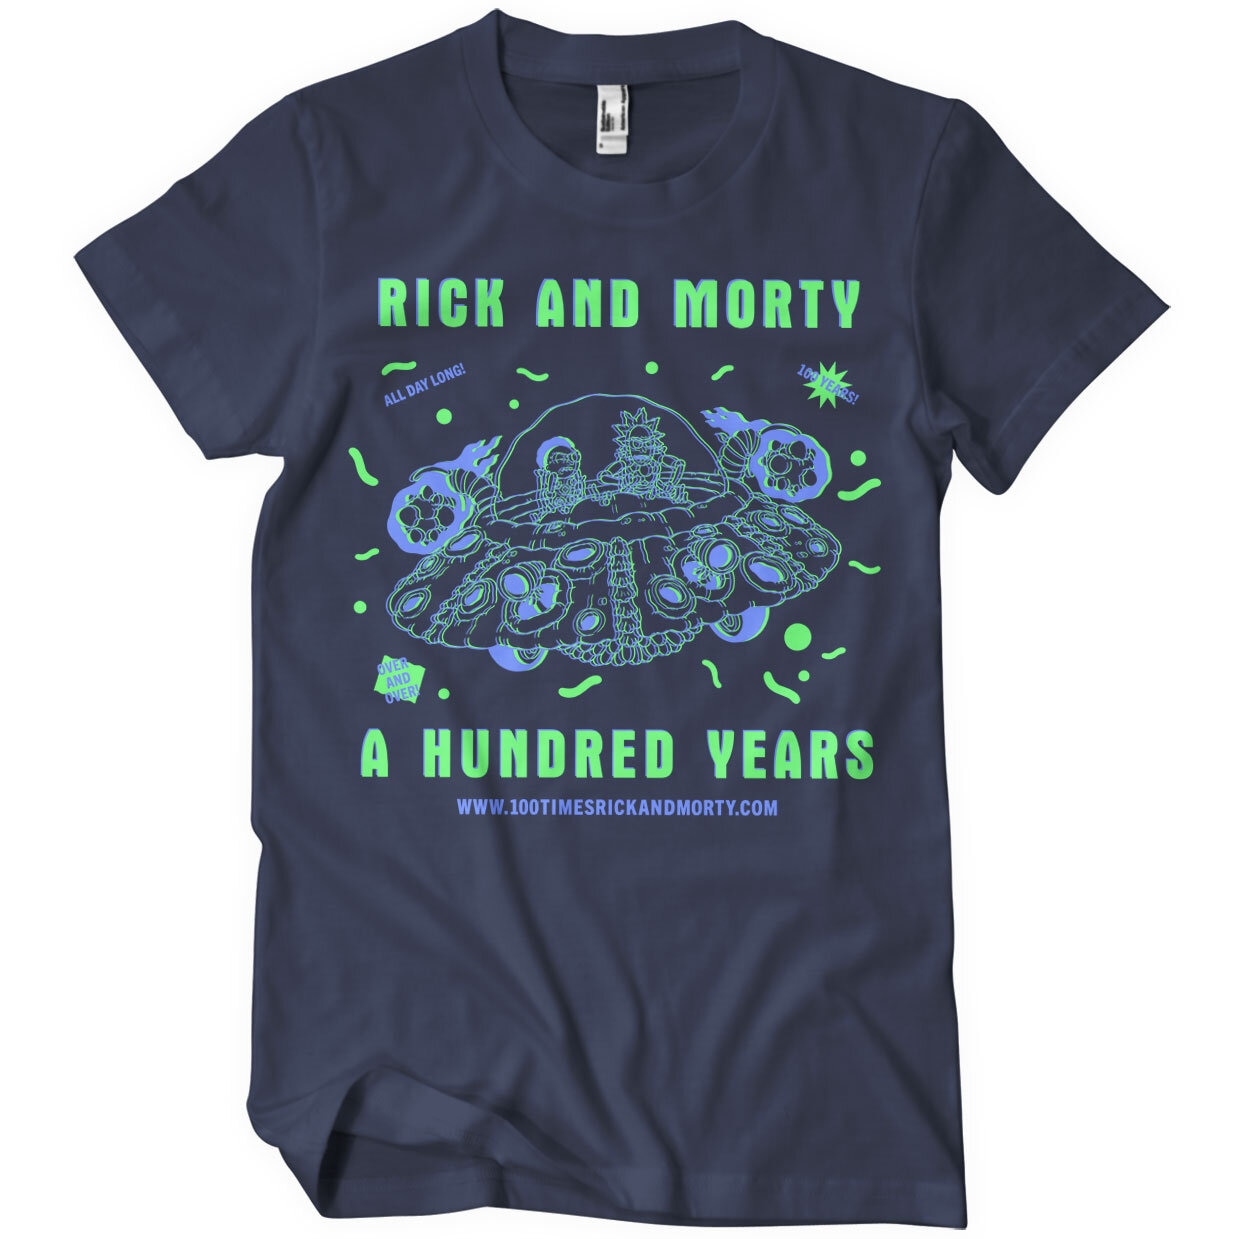 Rick And Morty - A Hundred Years T-Shirt